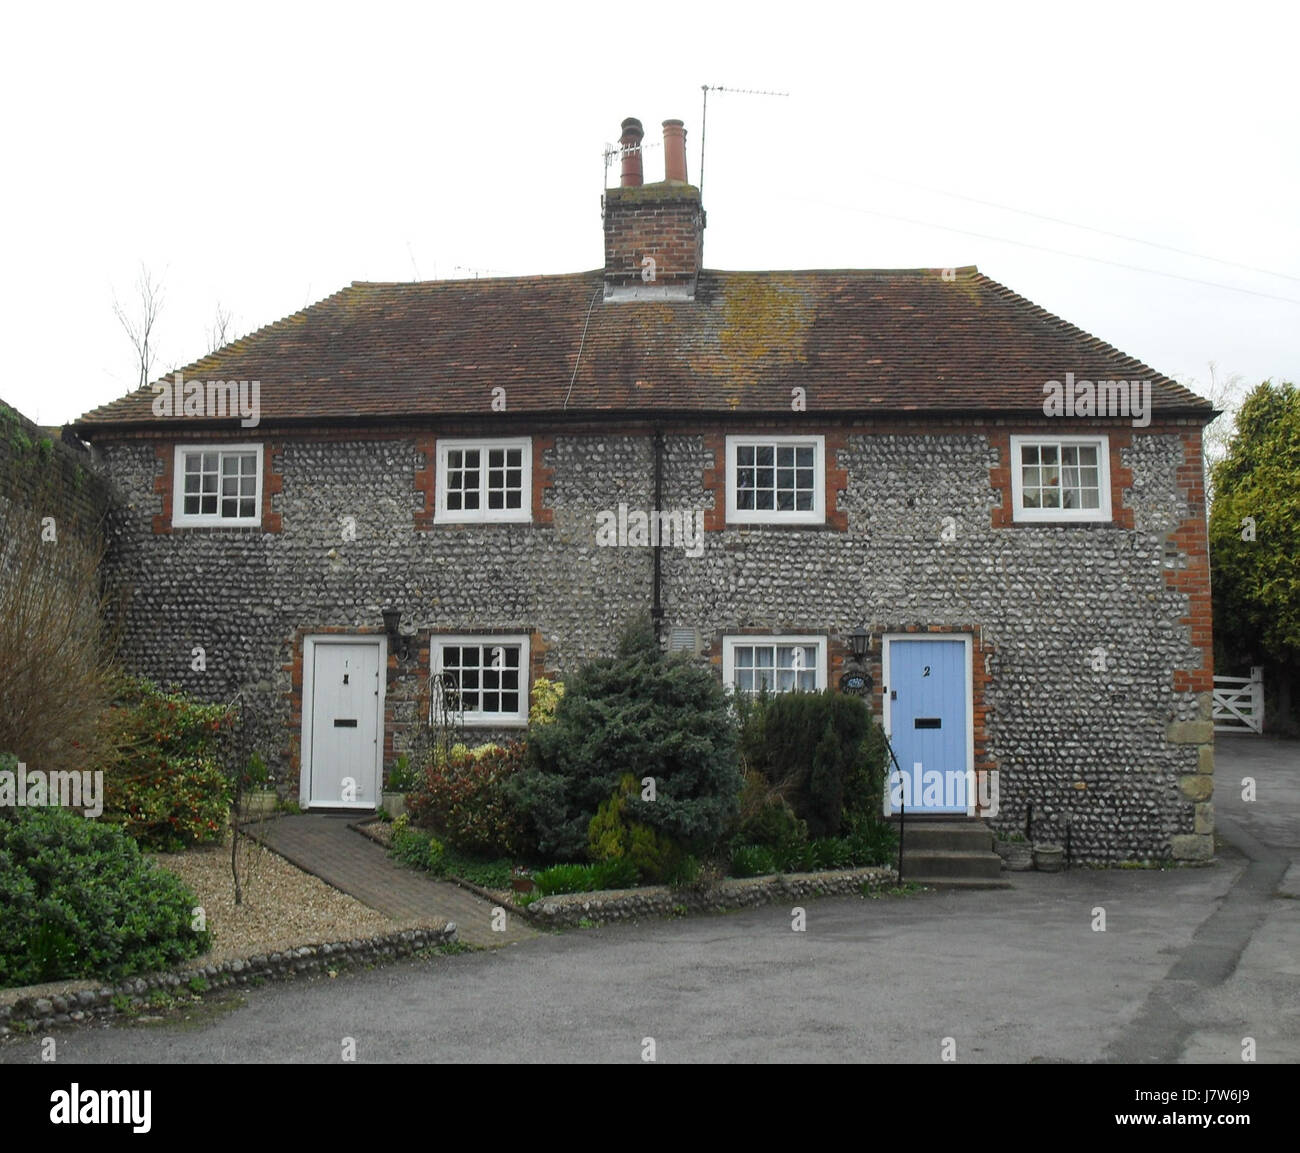 1 and 2 Church Lane, Old Town, Eastbourne (NHLE Code 1353111) (March 2010) Stock Photo